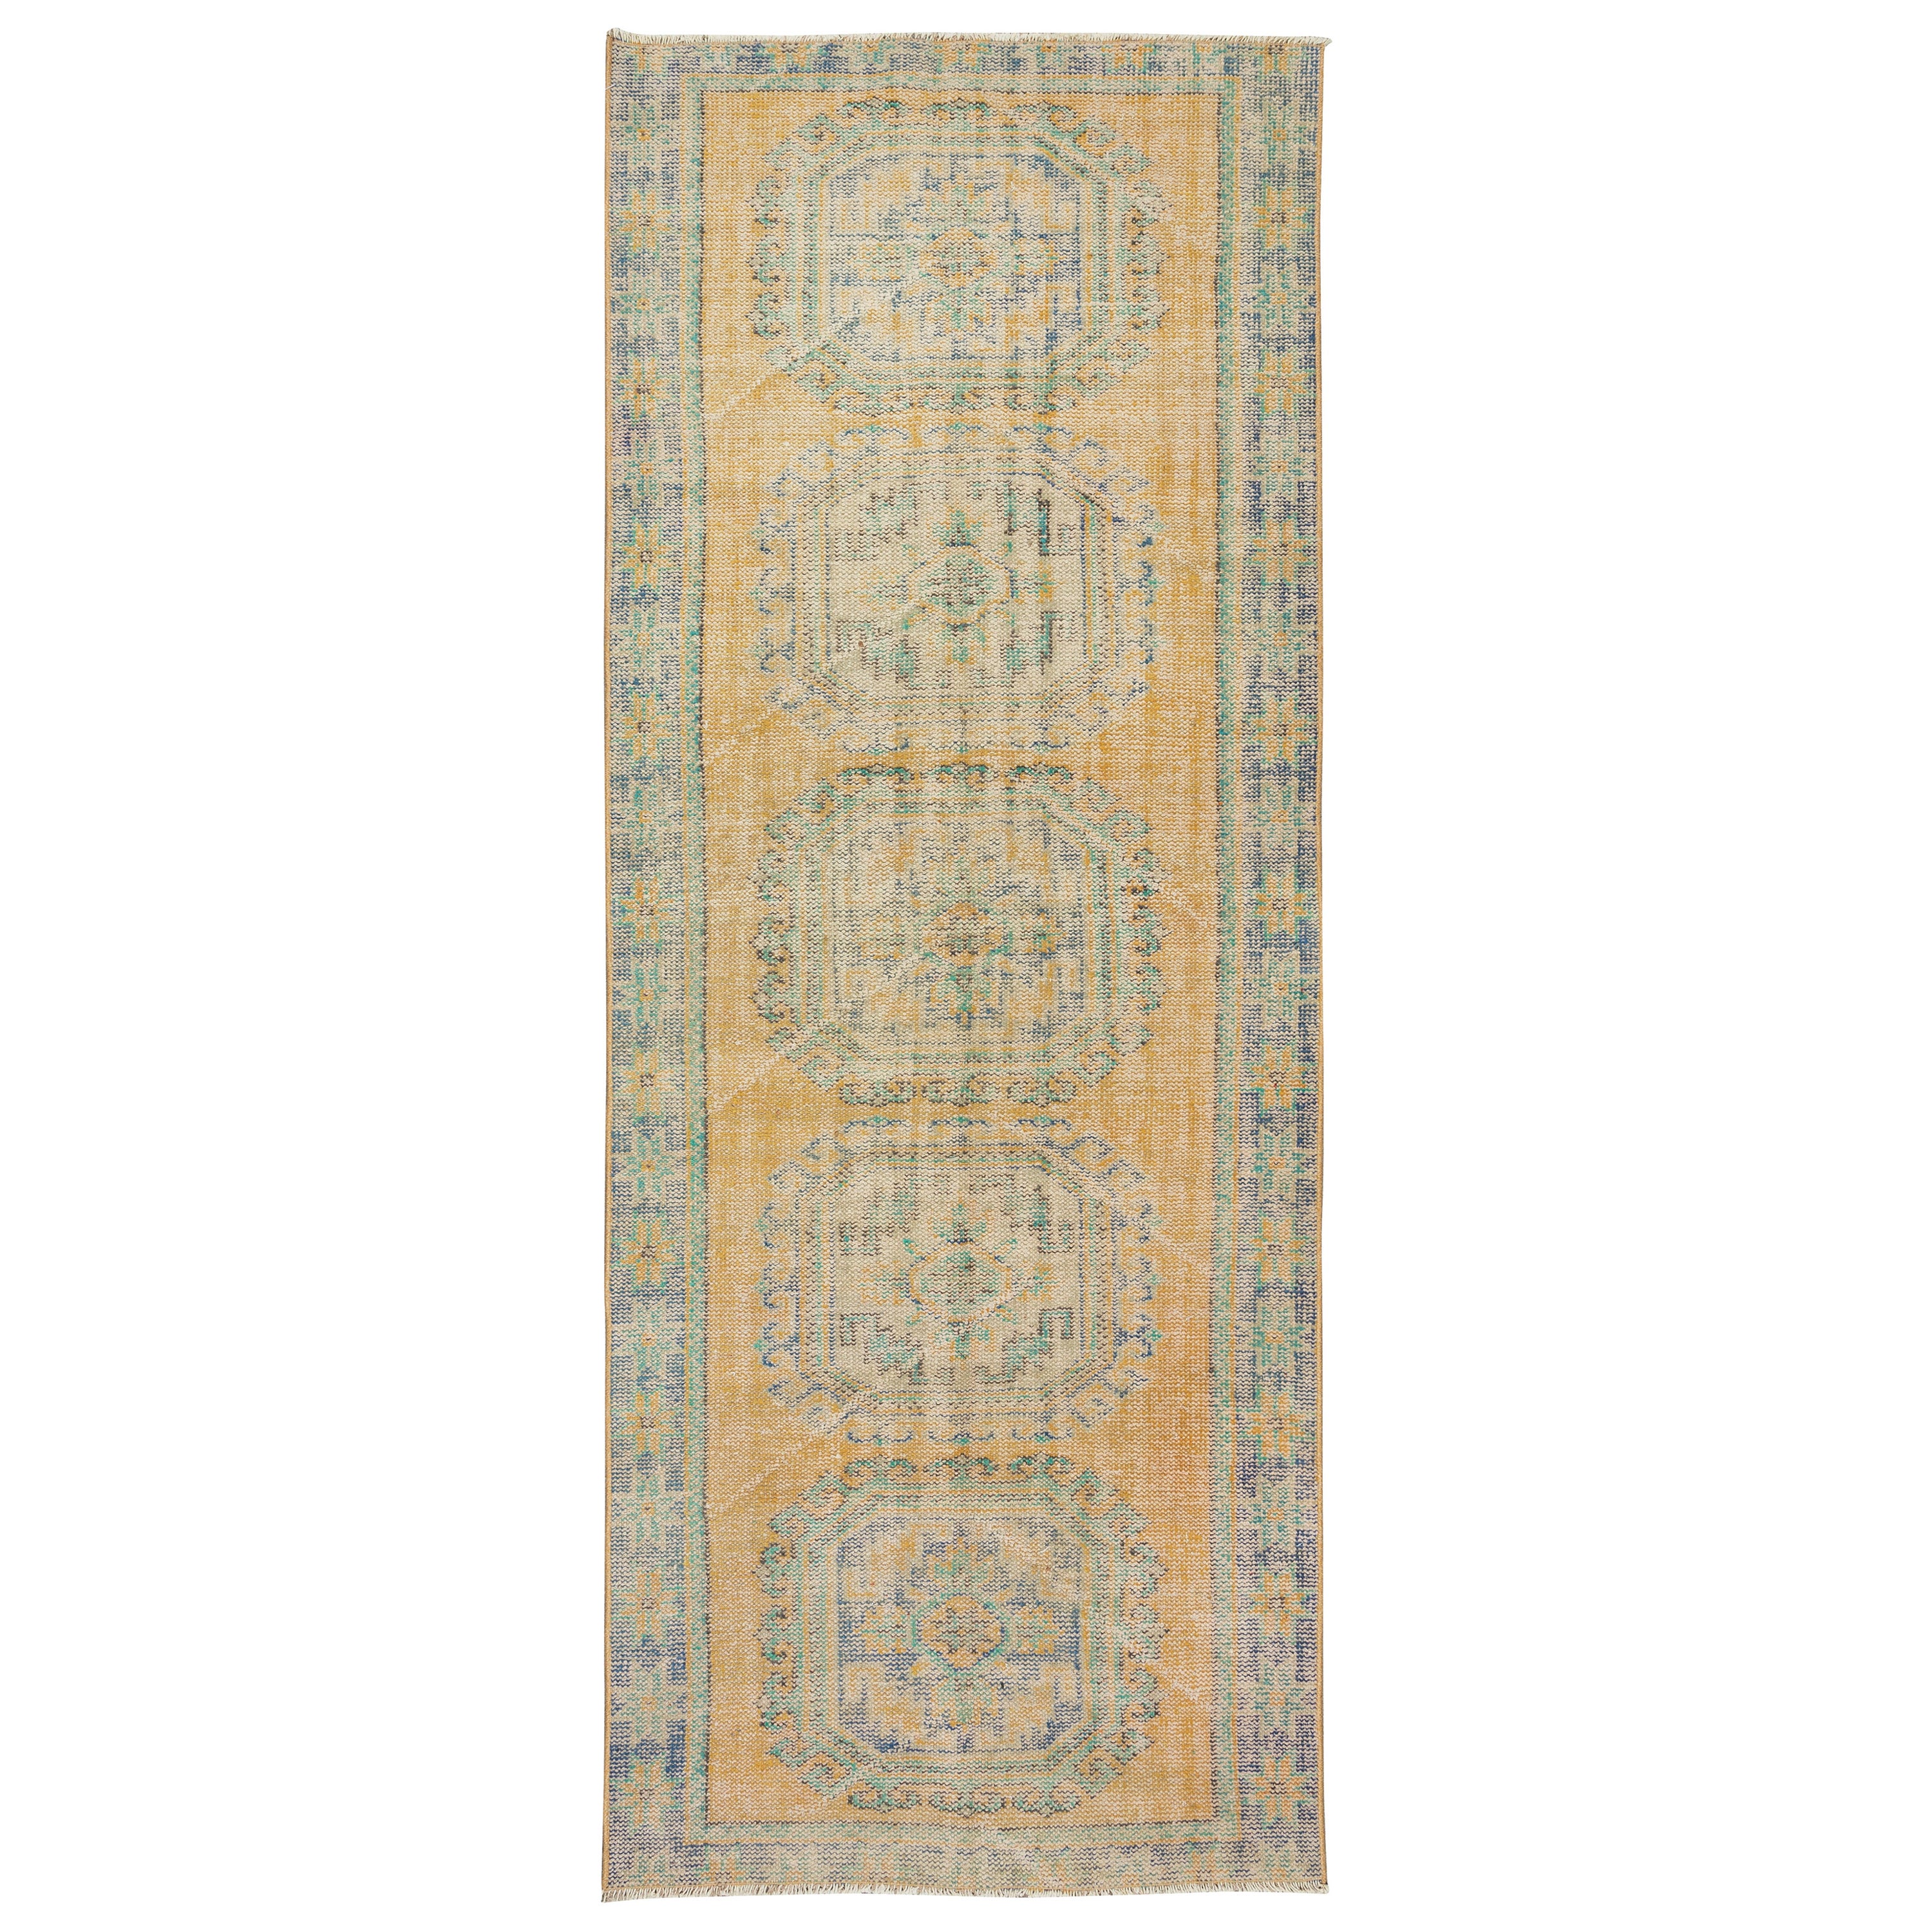 4.2x11 ft Hand Knotted Anatolian Runner Rug, Authentic Vintage Corridor Carpet